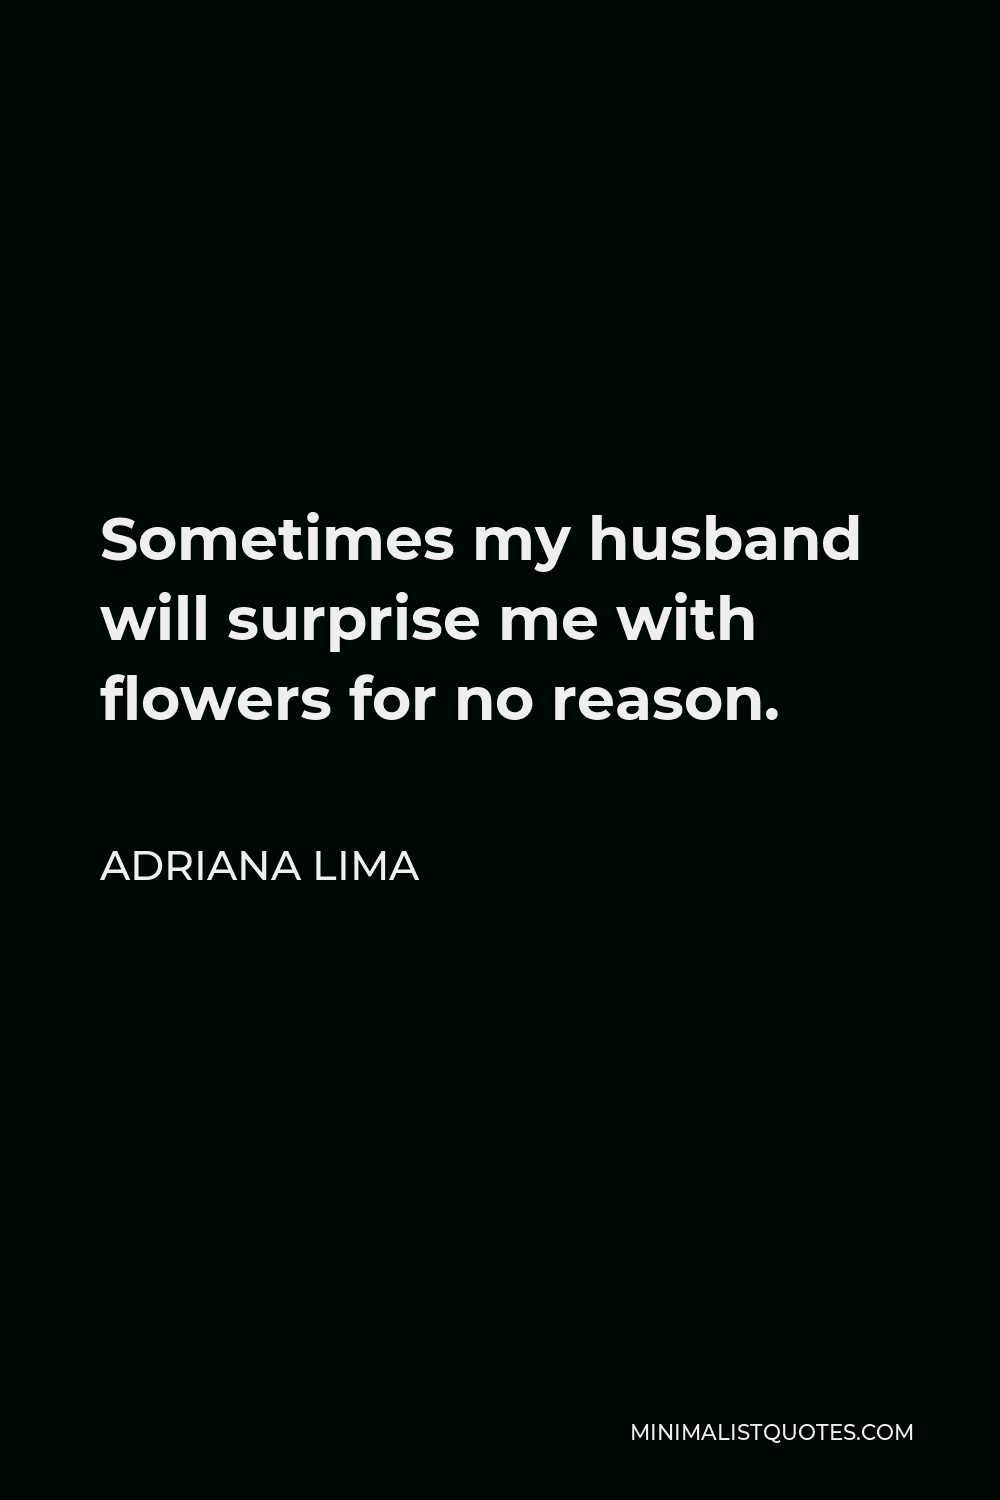 Adriana Lima Quote - Sometimes my husband will surprise me with flowers for no reason.